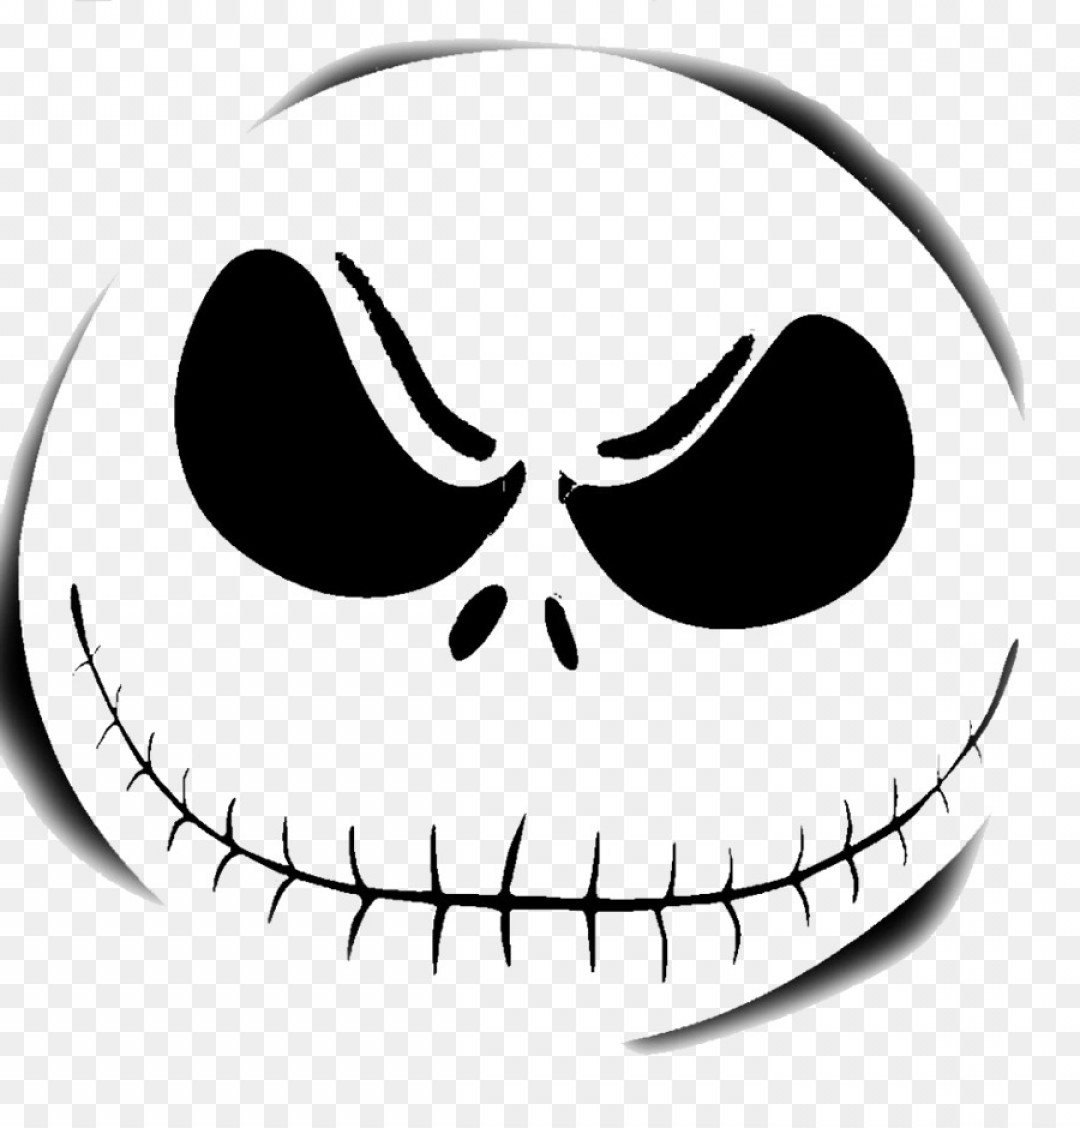 Jack From Nightmare Before Christmas Svg - Jack Skellington And Sally